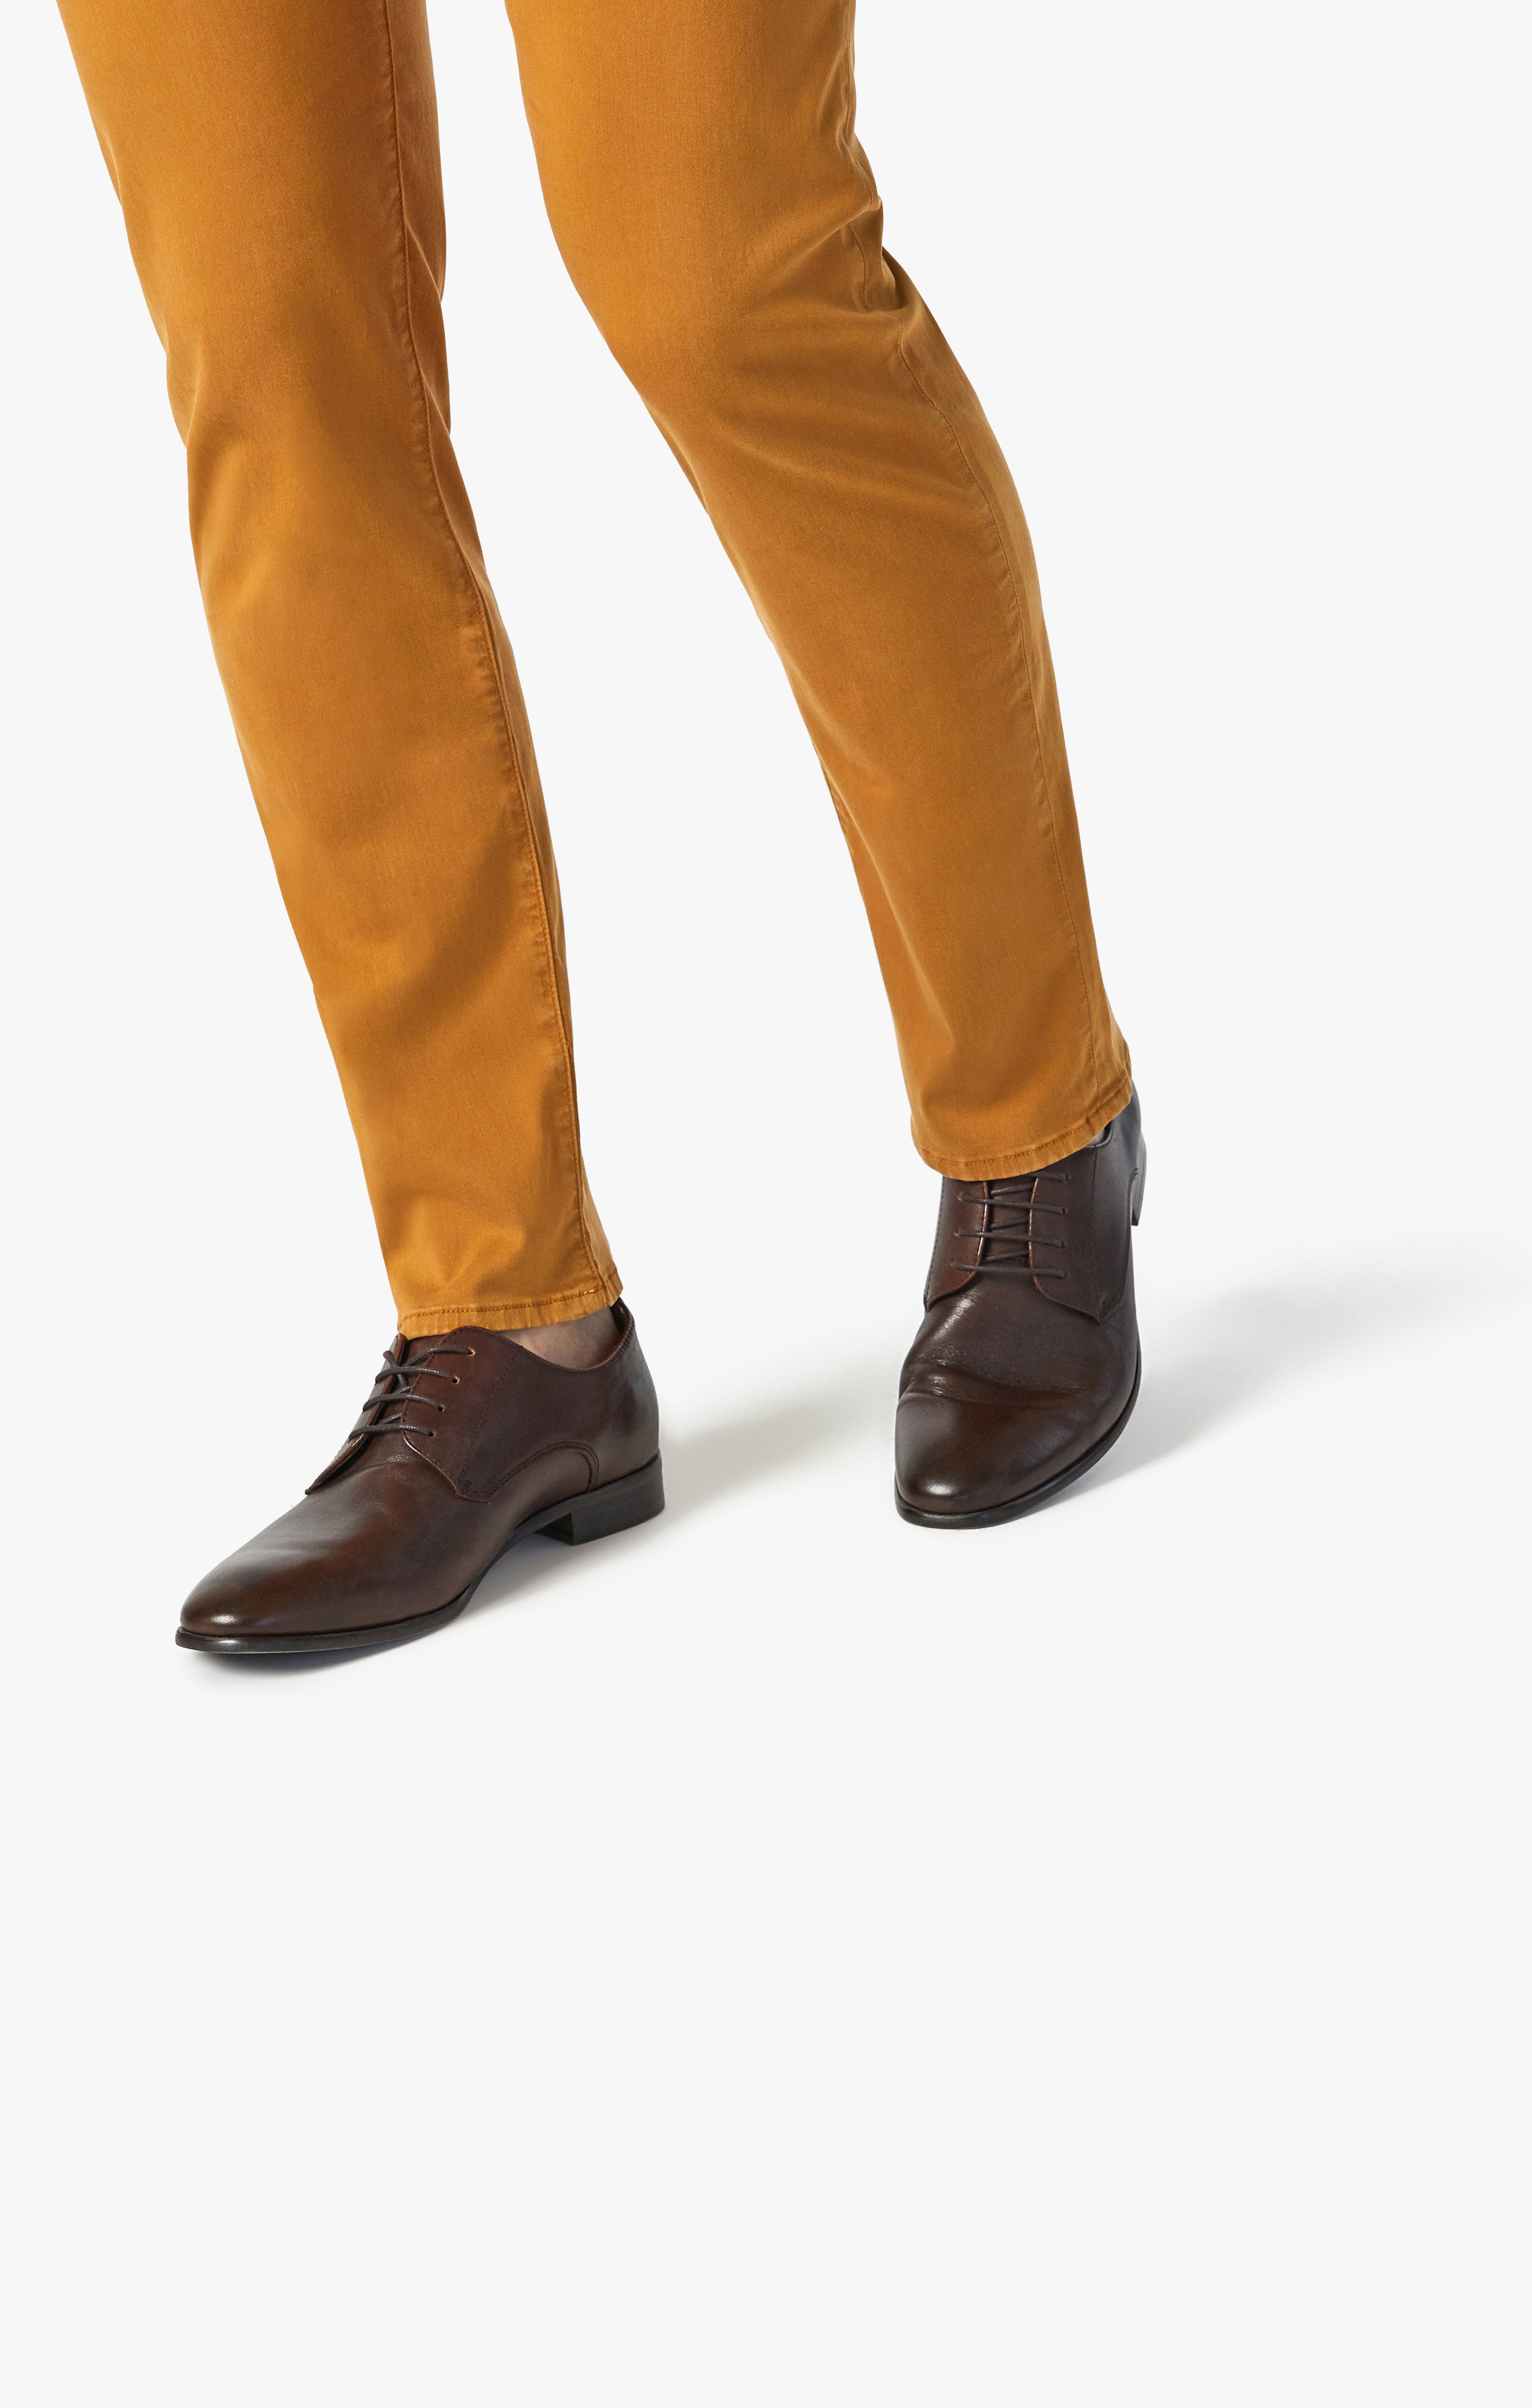 Courage Straight Leg Pants In Golden Brown Twill Image 3